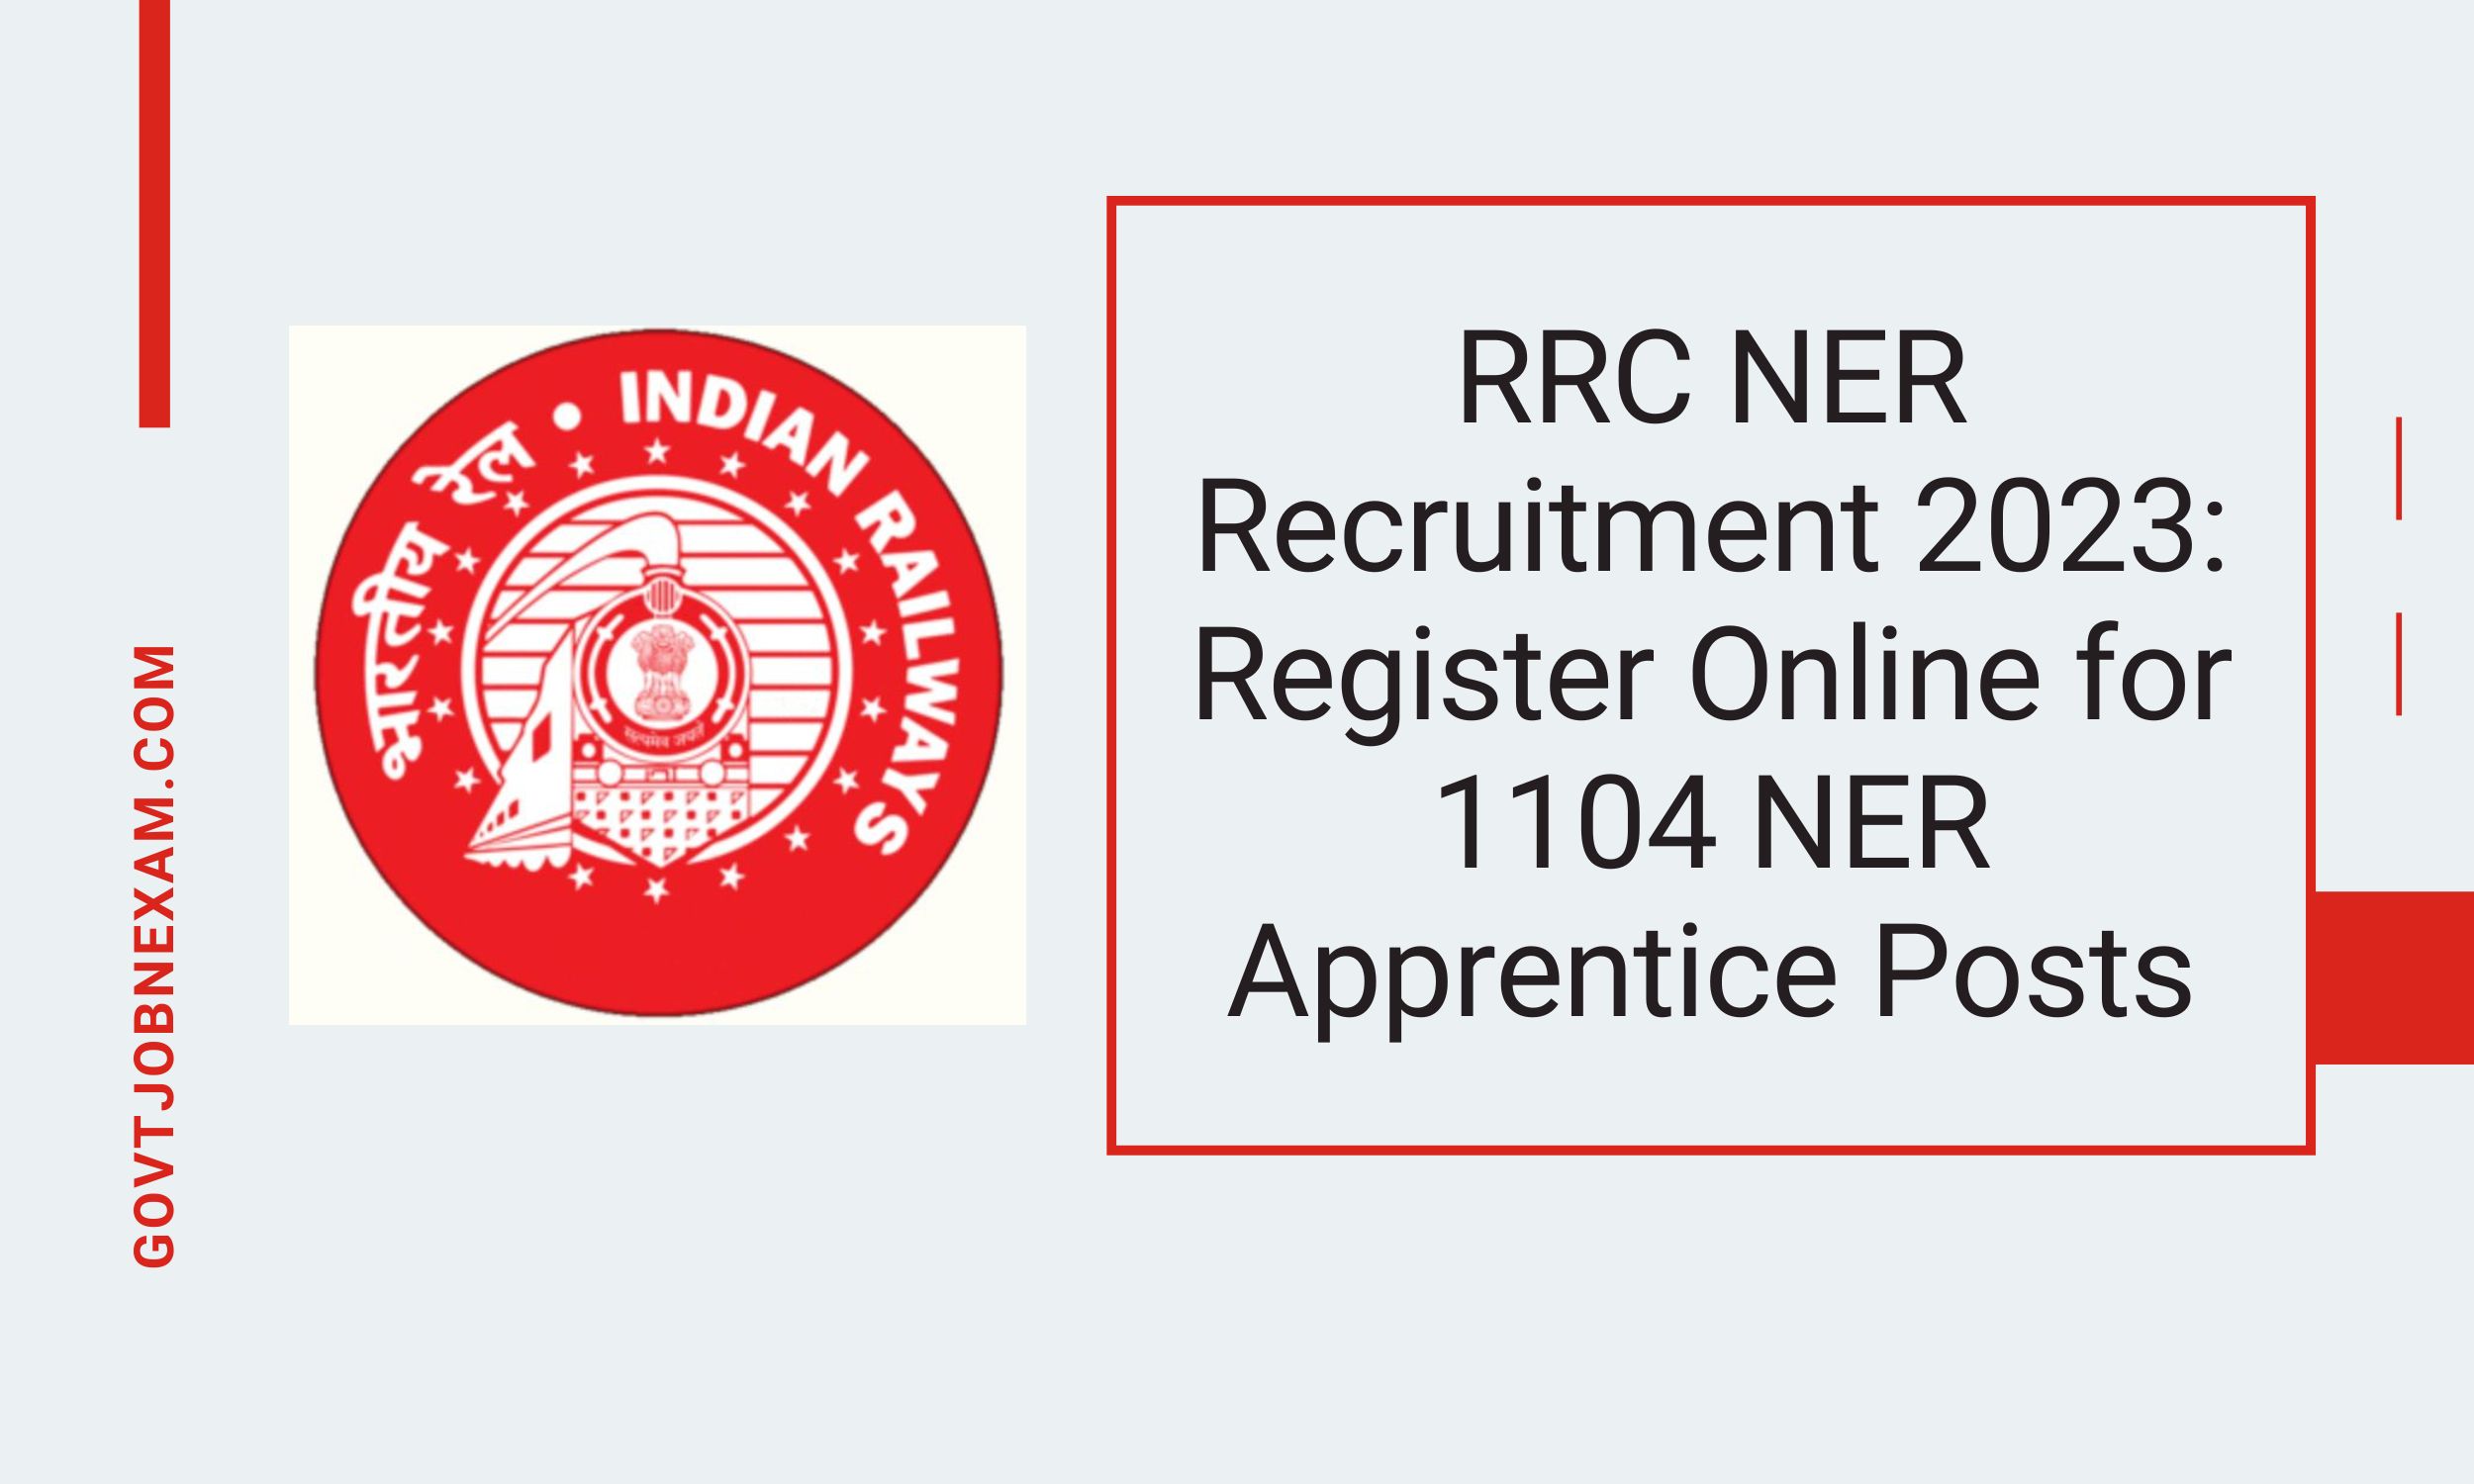 You are currently viewing RRC NER Recruitment 2023: Register Online for 1104 NER Apprentice Posts